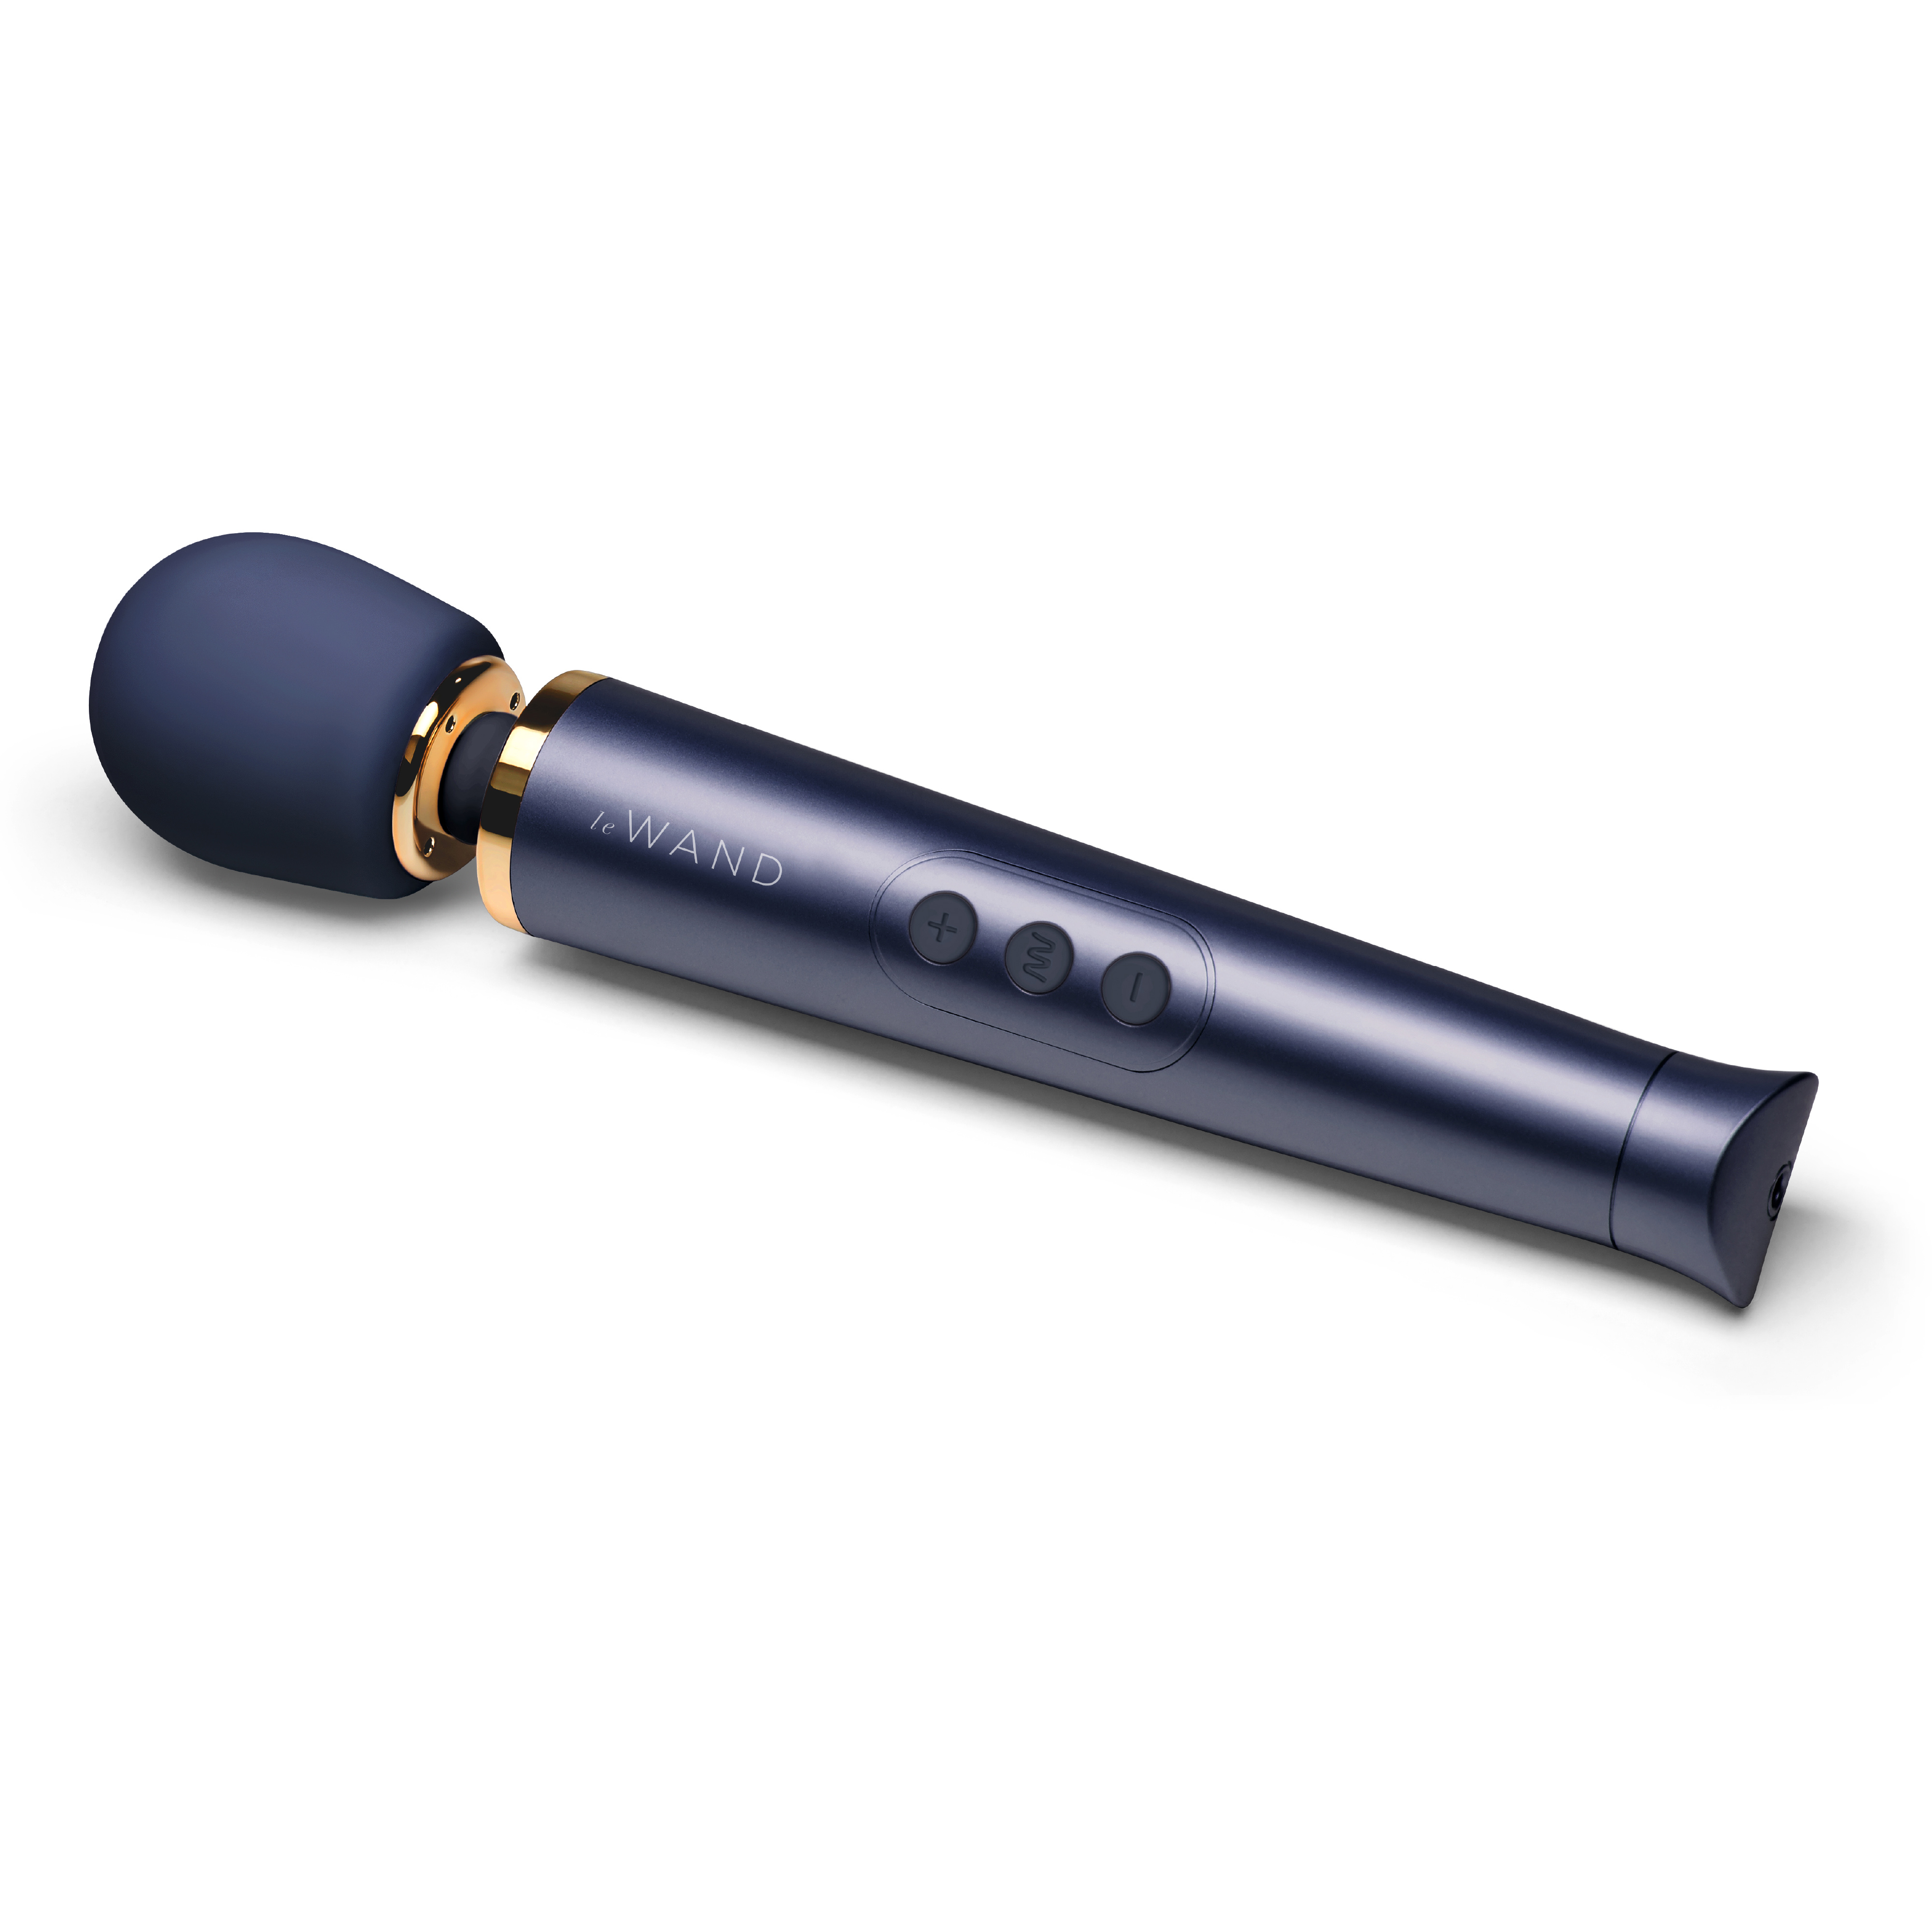 Le Wand Petite Navy rechargeable massager